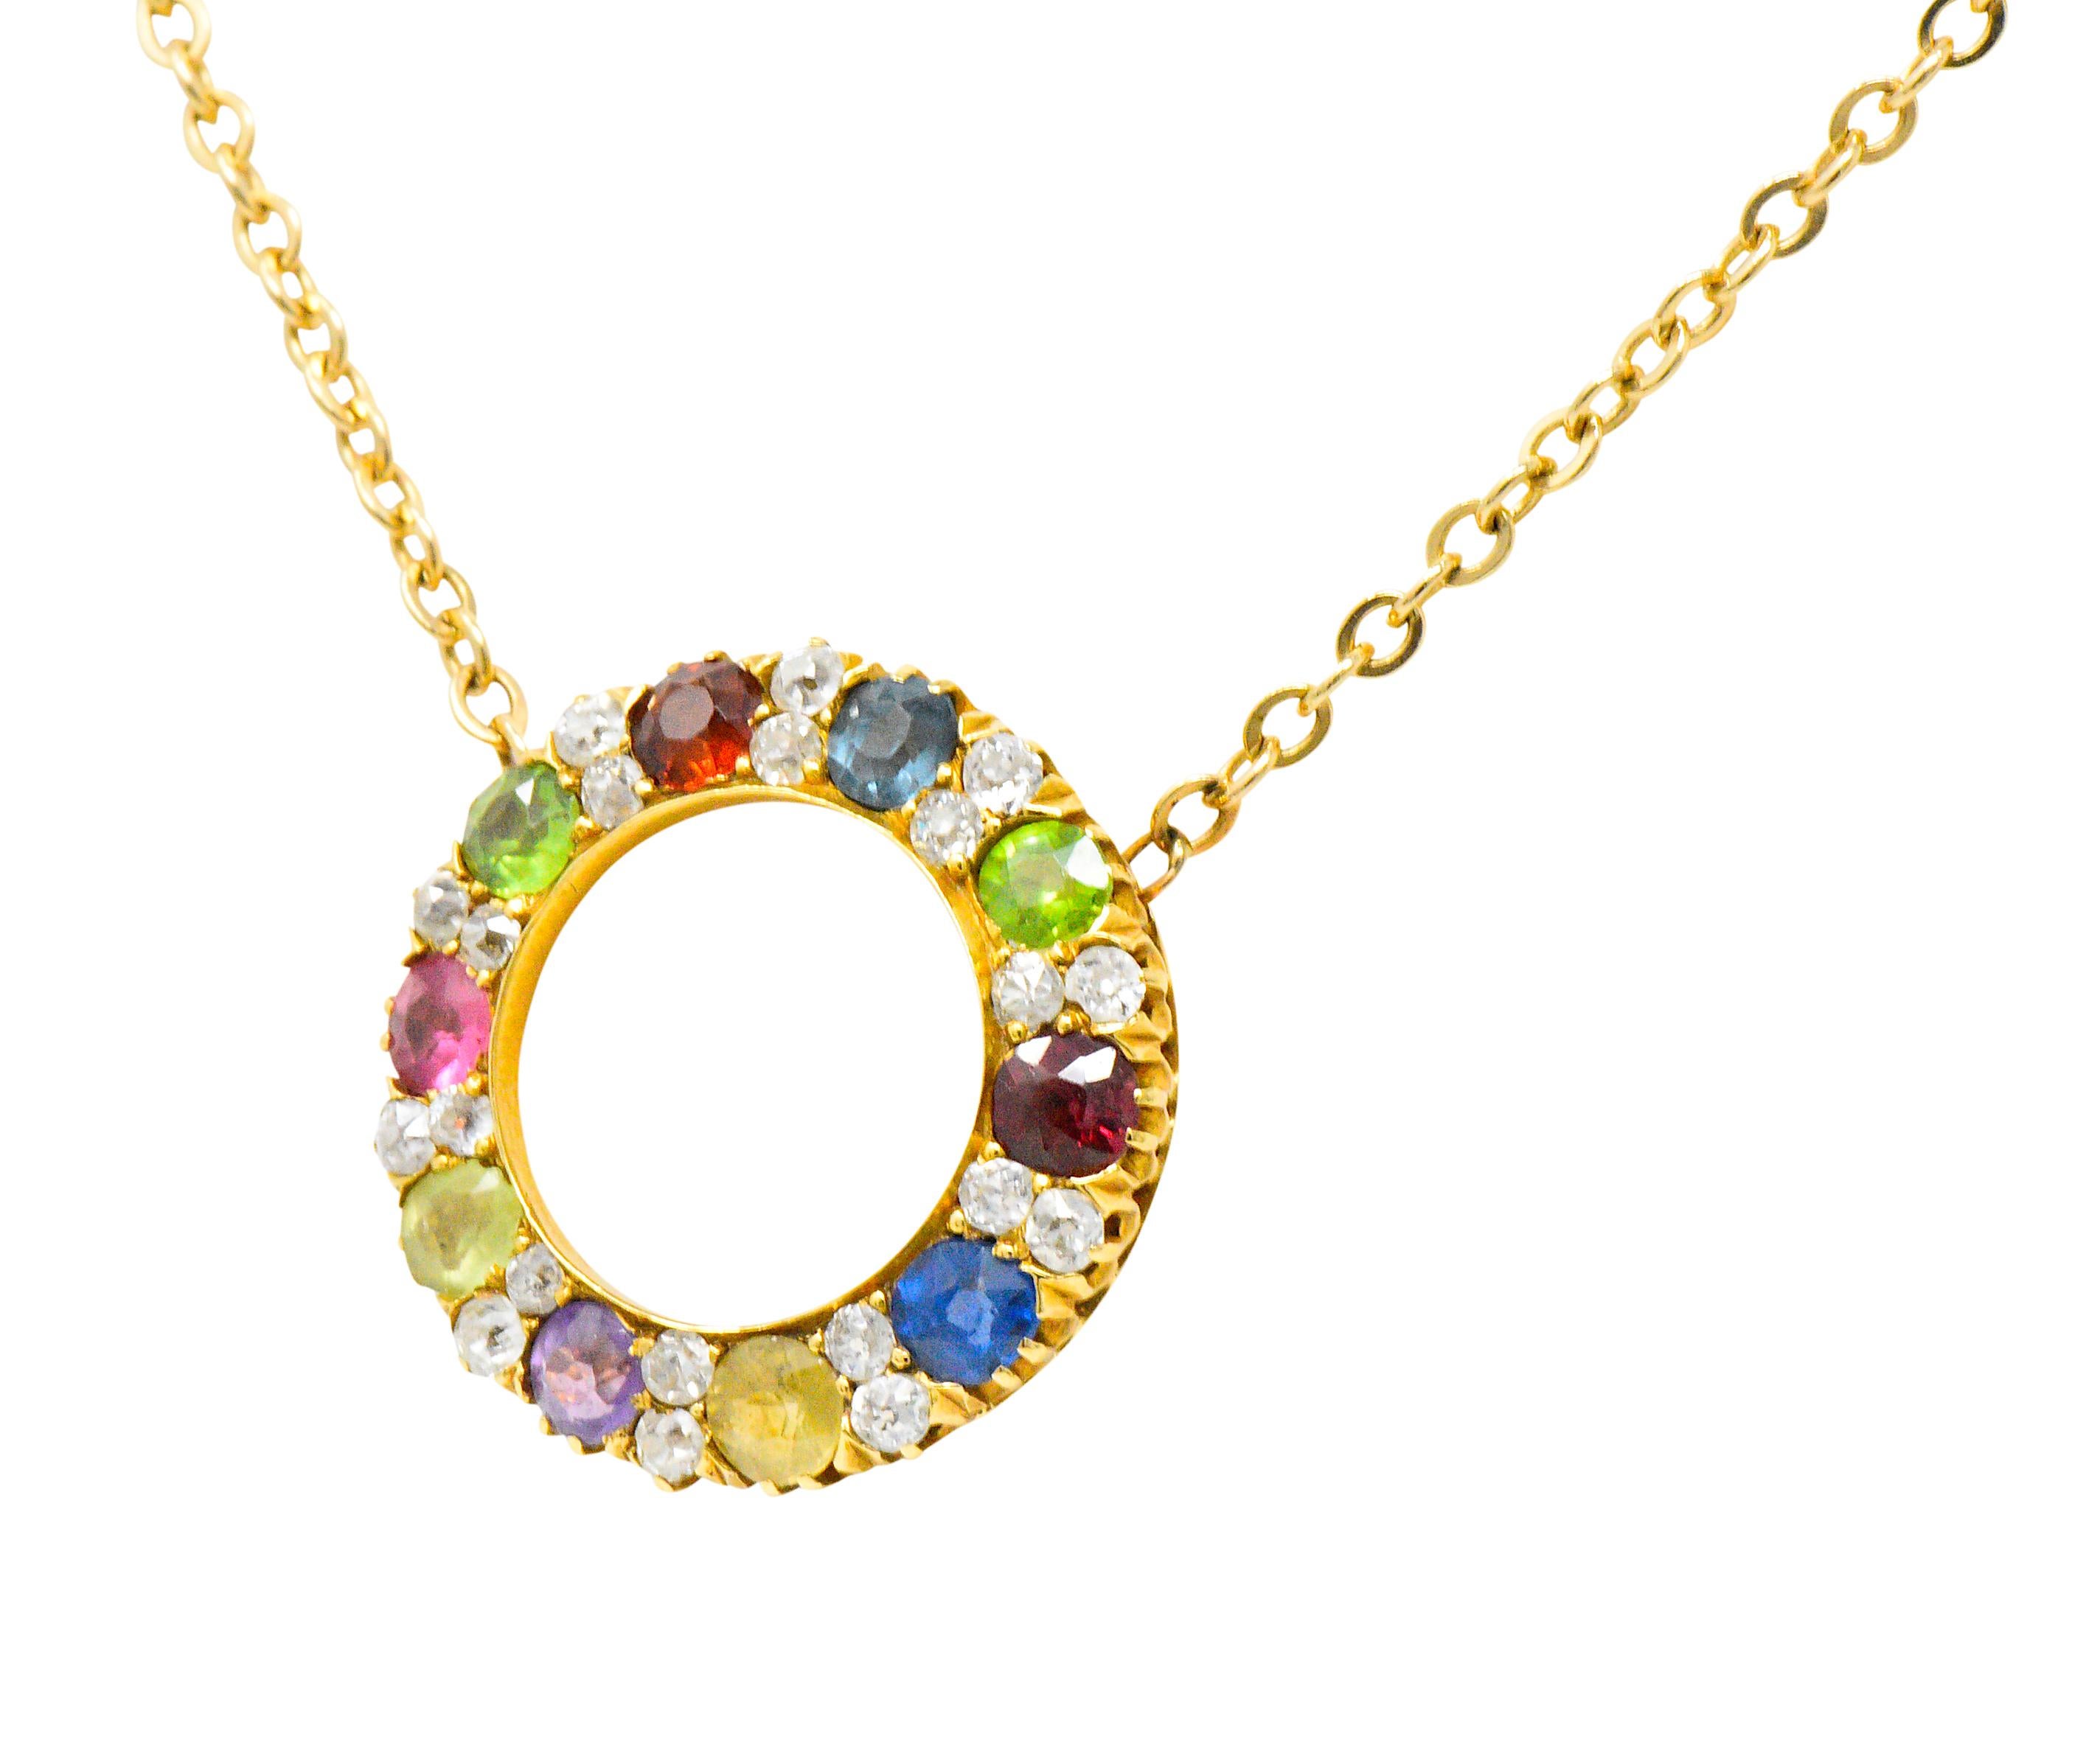 Designed as an open circle set with round cut gemstones, including amethyst, demantoid garnet, tourmaline, sapphire and ruby, weighing approximately 2.00 carats total

Accented with old mine cut diamonds, weighing approximately 0.50 carats total,